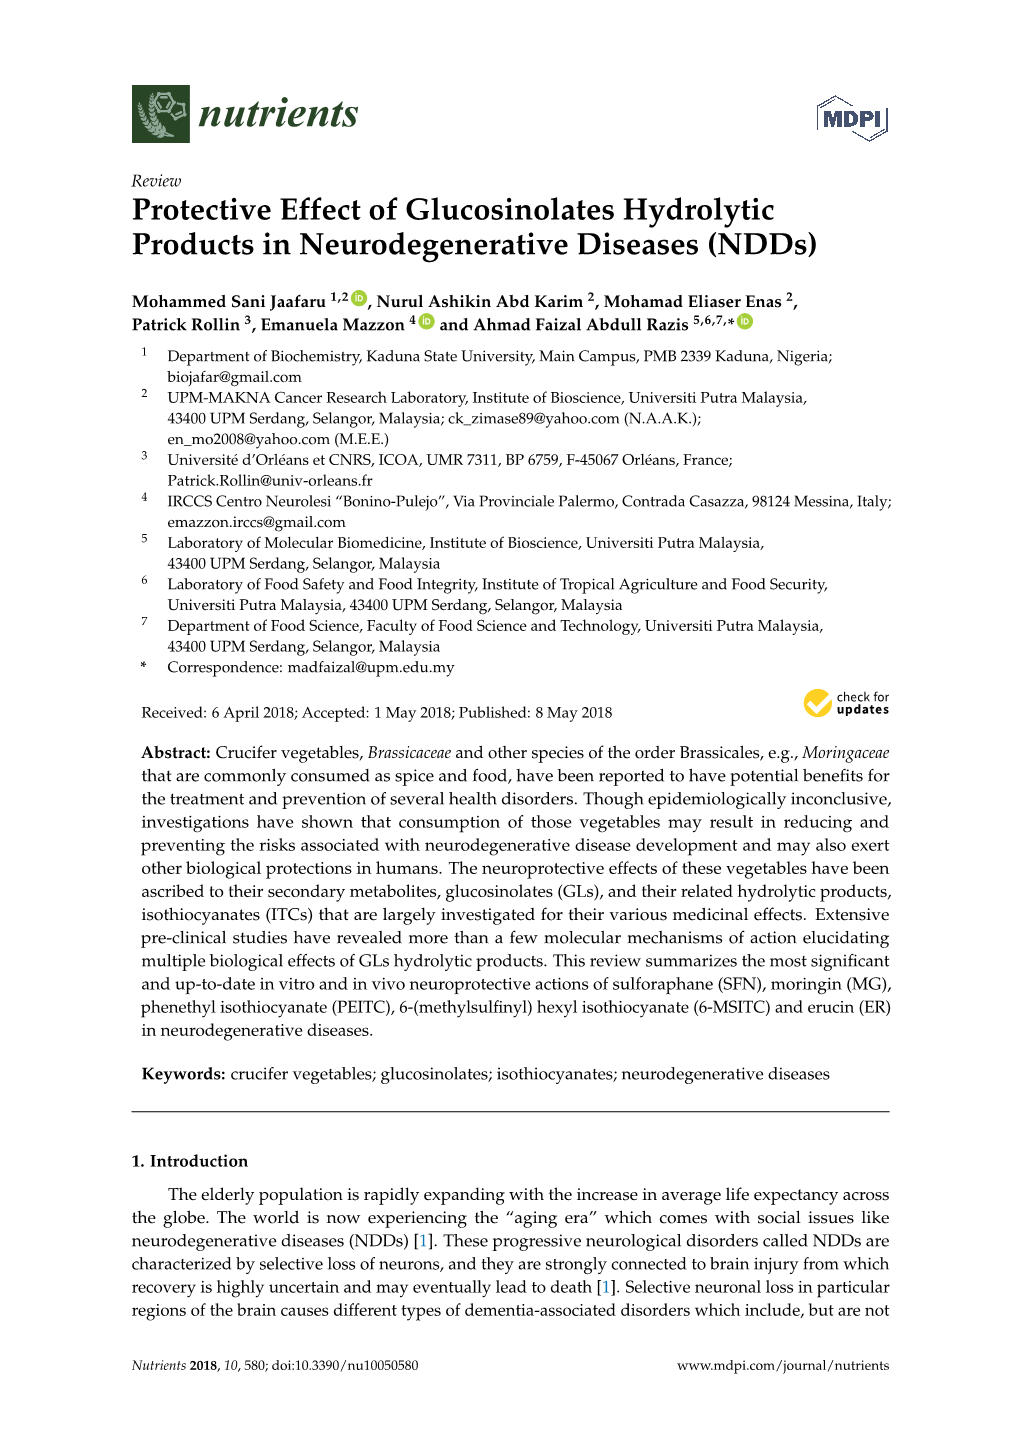 Protective Effect of Glucosinolates Hydrolytic Products in Neurodegenerative Diseases (Ndds)